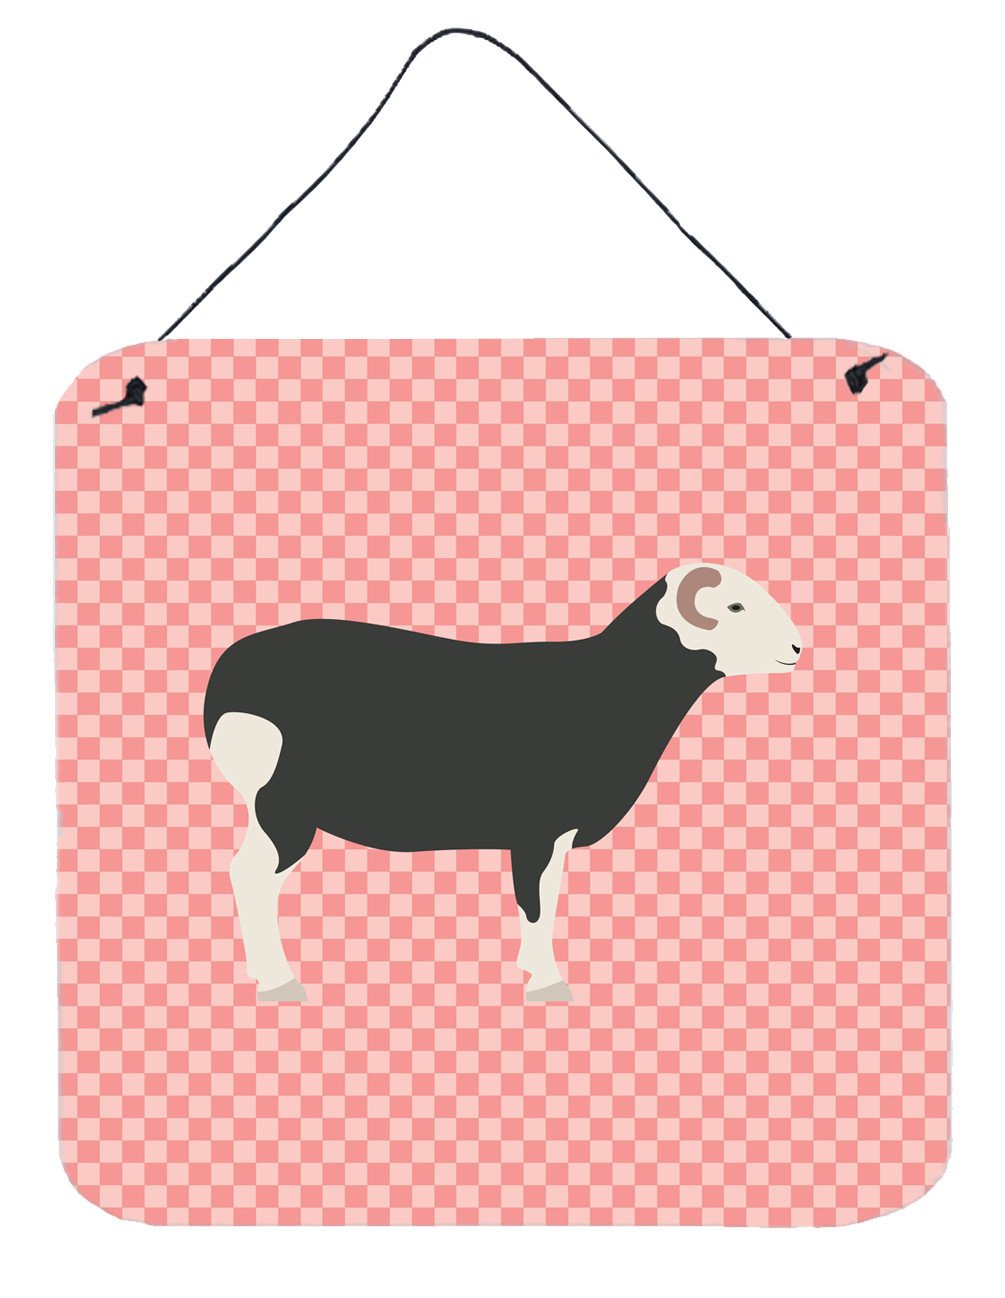 Herwick Sheep Pink Check Wall or Door Hanging Prints BB7970DS66 by Caroline's Treasures